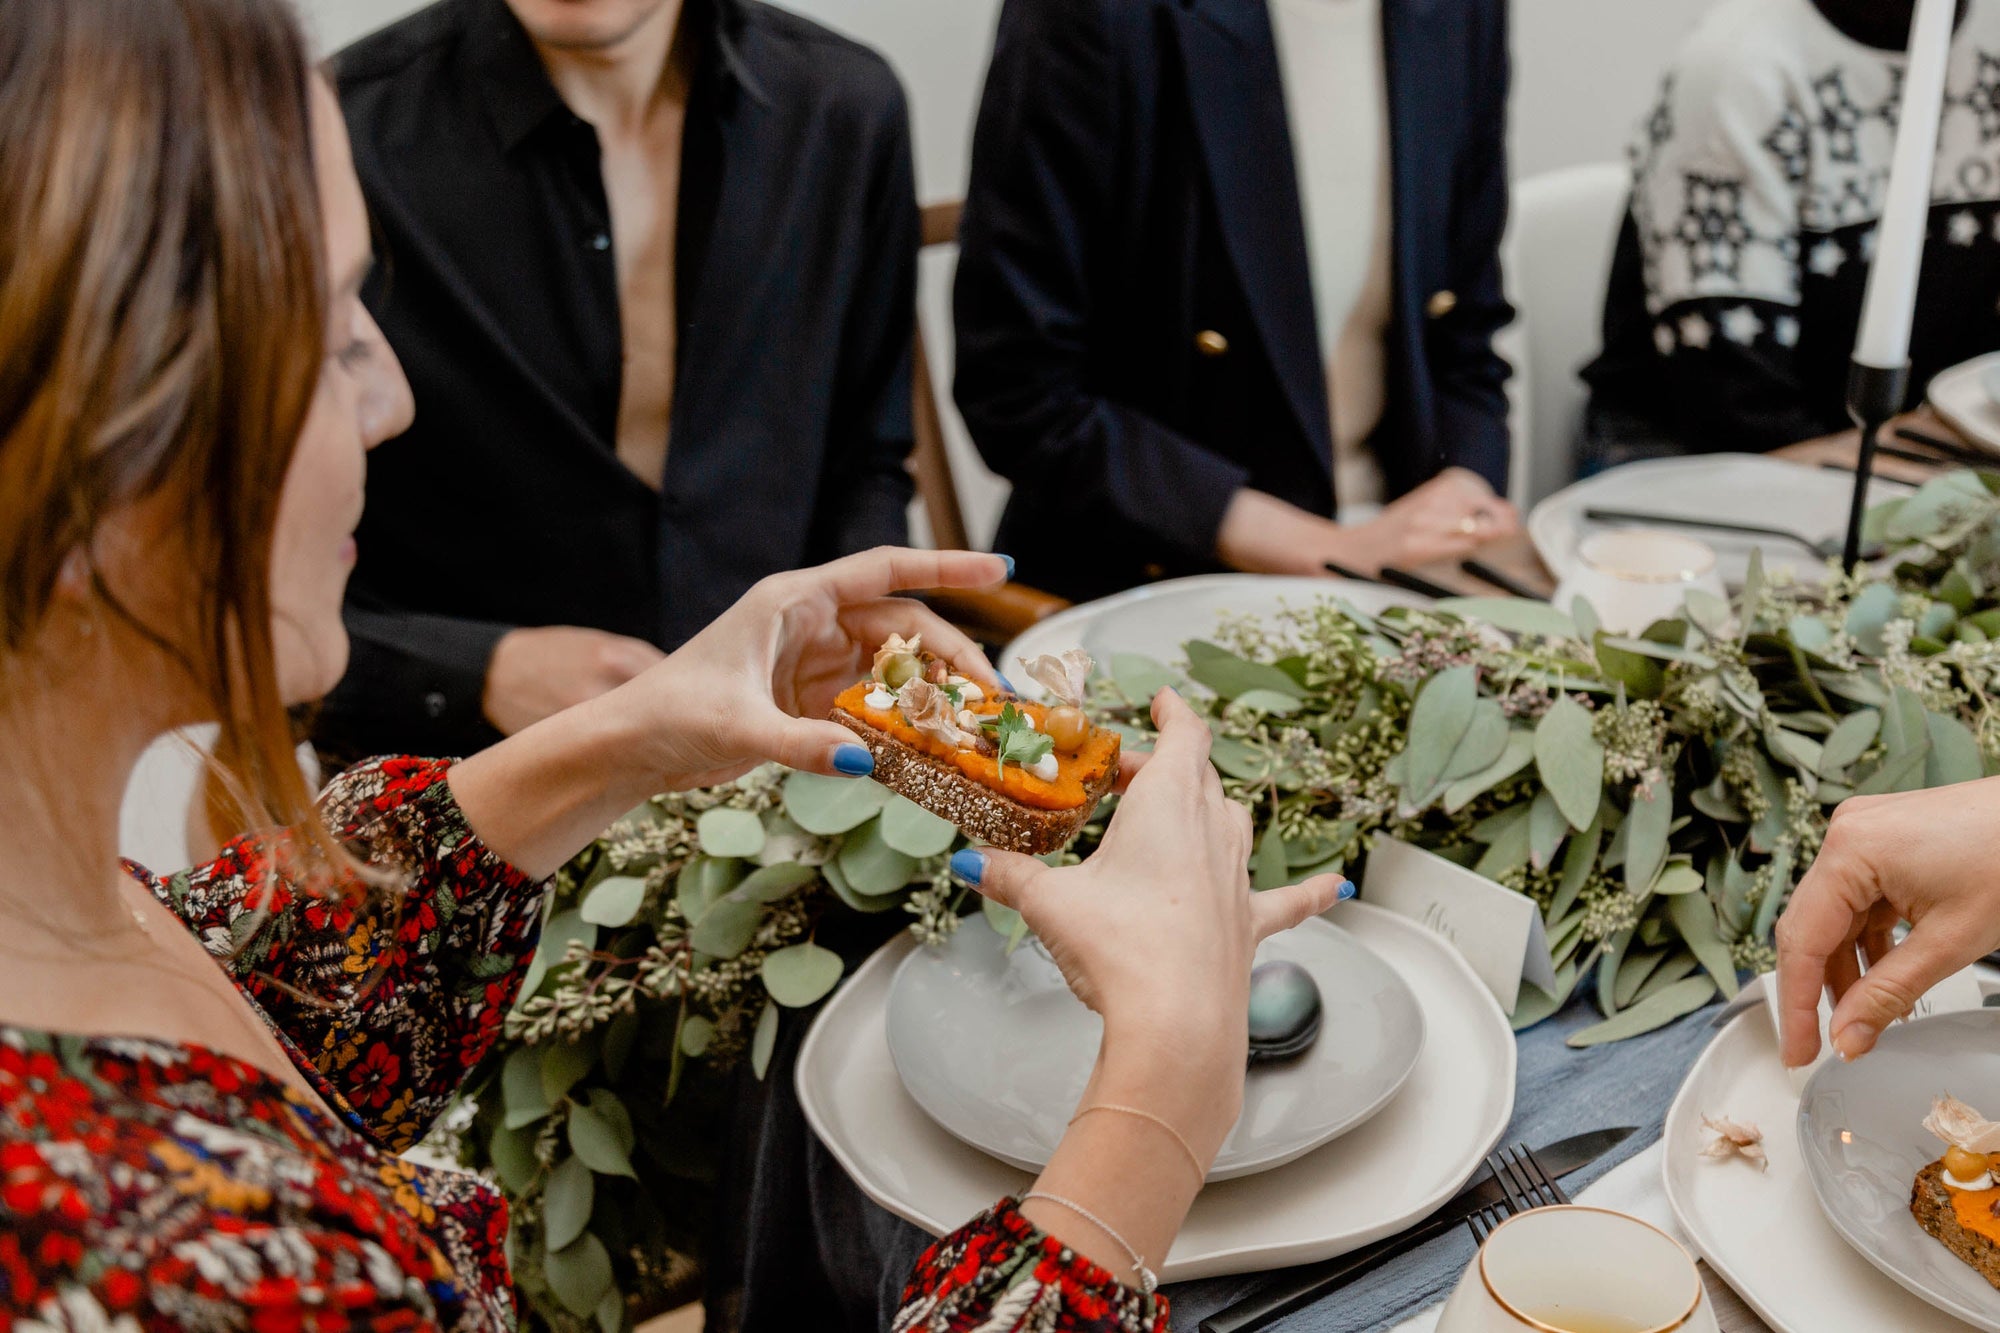 This Autumnal Friendsgiving Opted for Squash Toast over Turkey